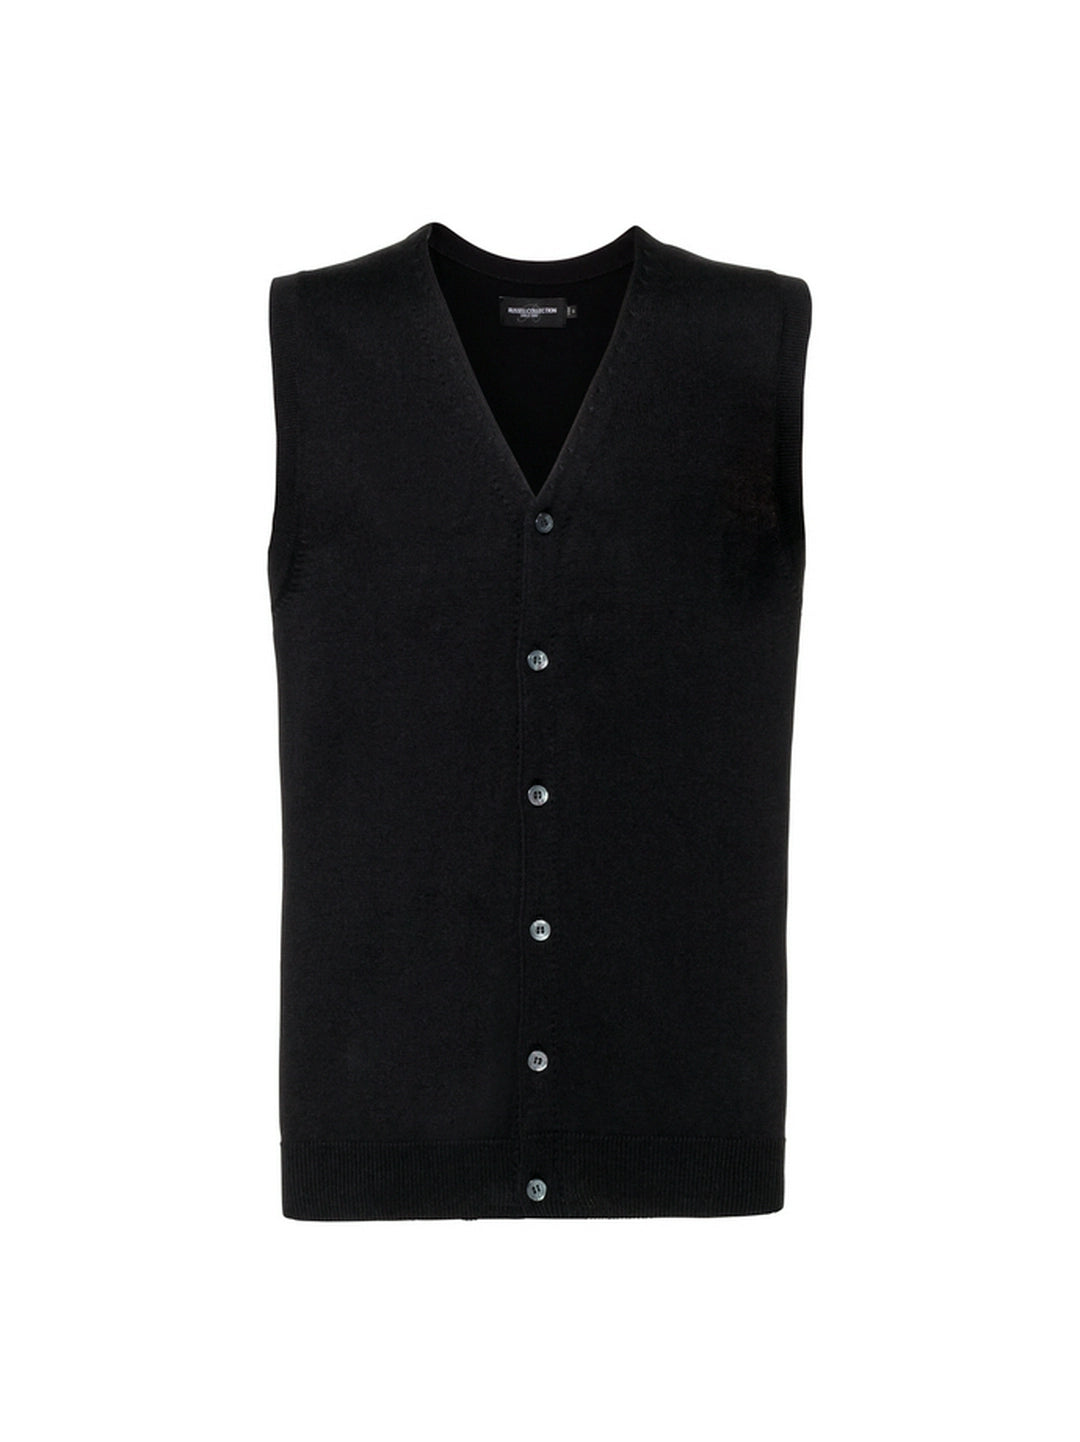 Russell Collection 719M Mens V-Neck Sleeveless Knitted Cardigan - COOZO